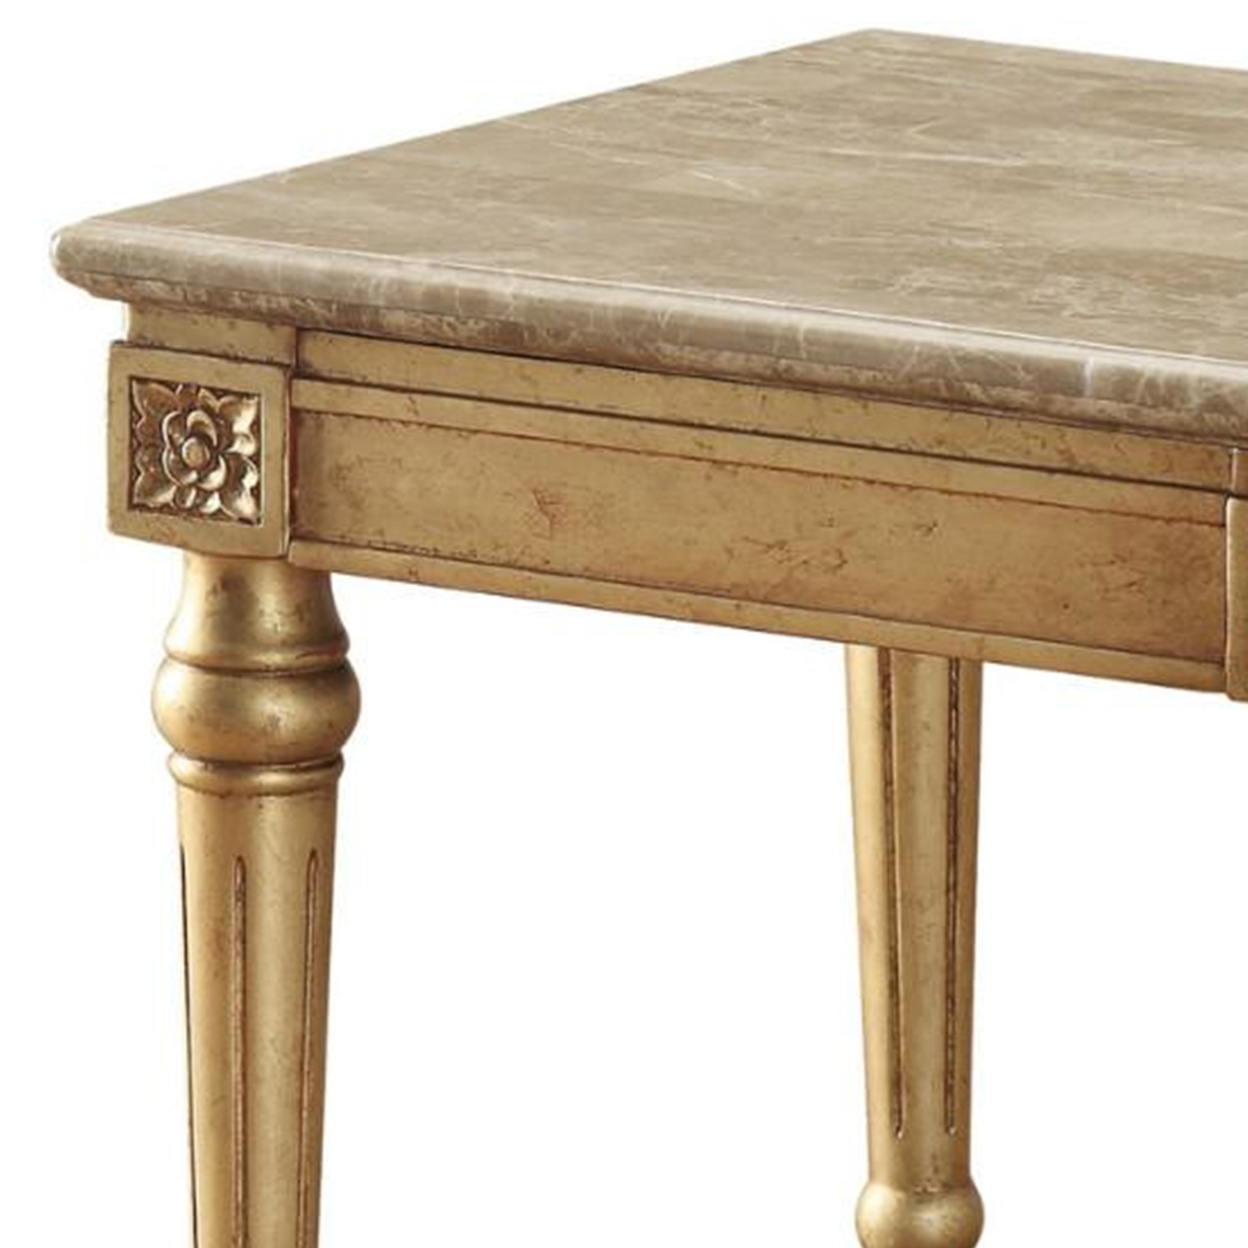 Marble Top End Table With Fluted Detail Wooden Turned Legs, Gold- Saltoro Sherpi